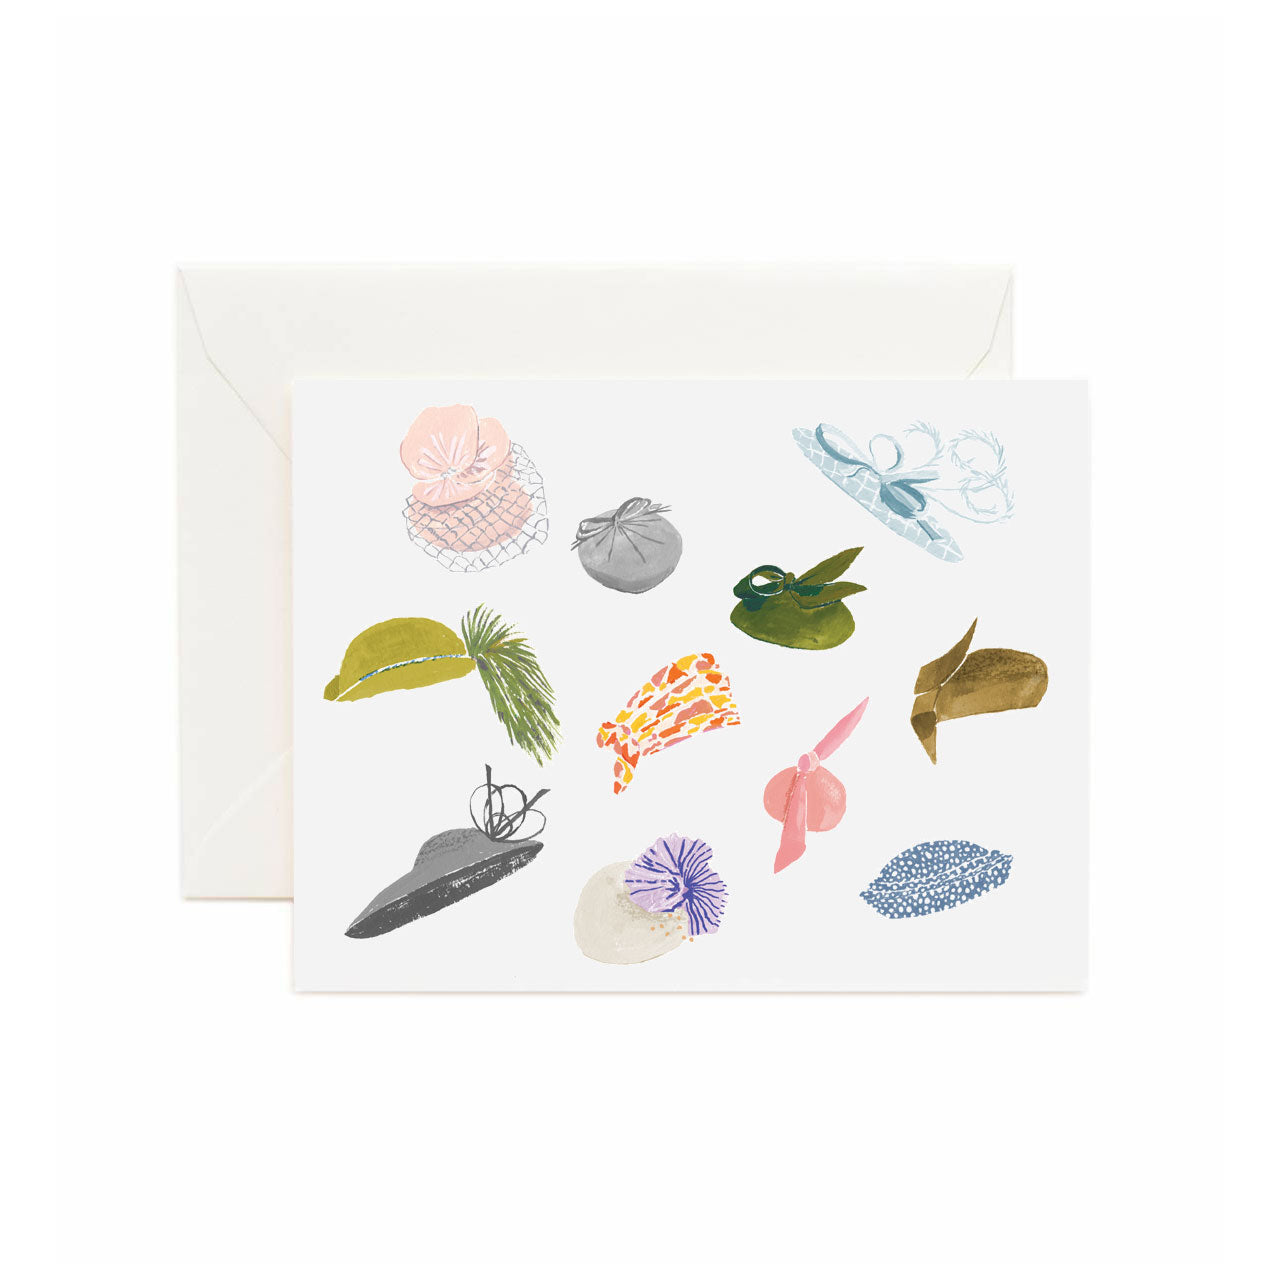 Royal Wedding Stationary Cards. Each card has an assortment of popular illustrated royal hats